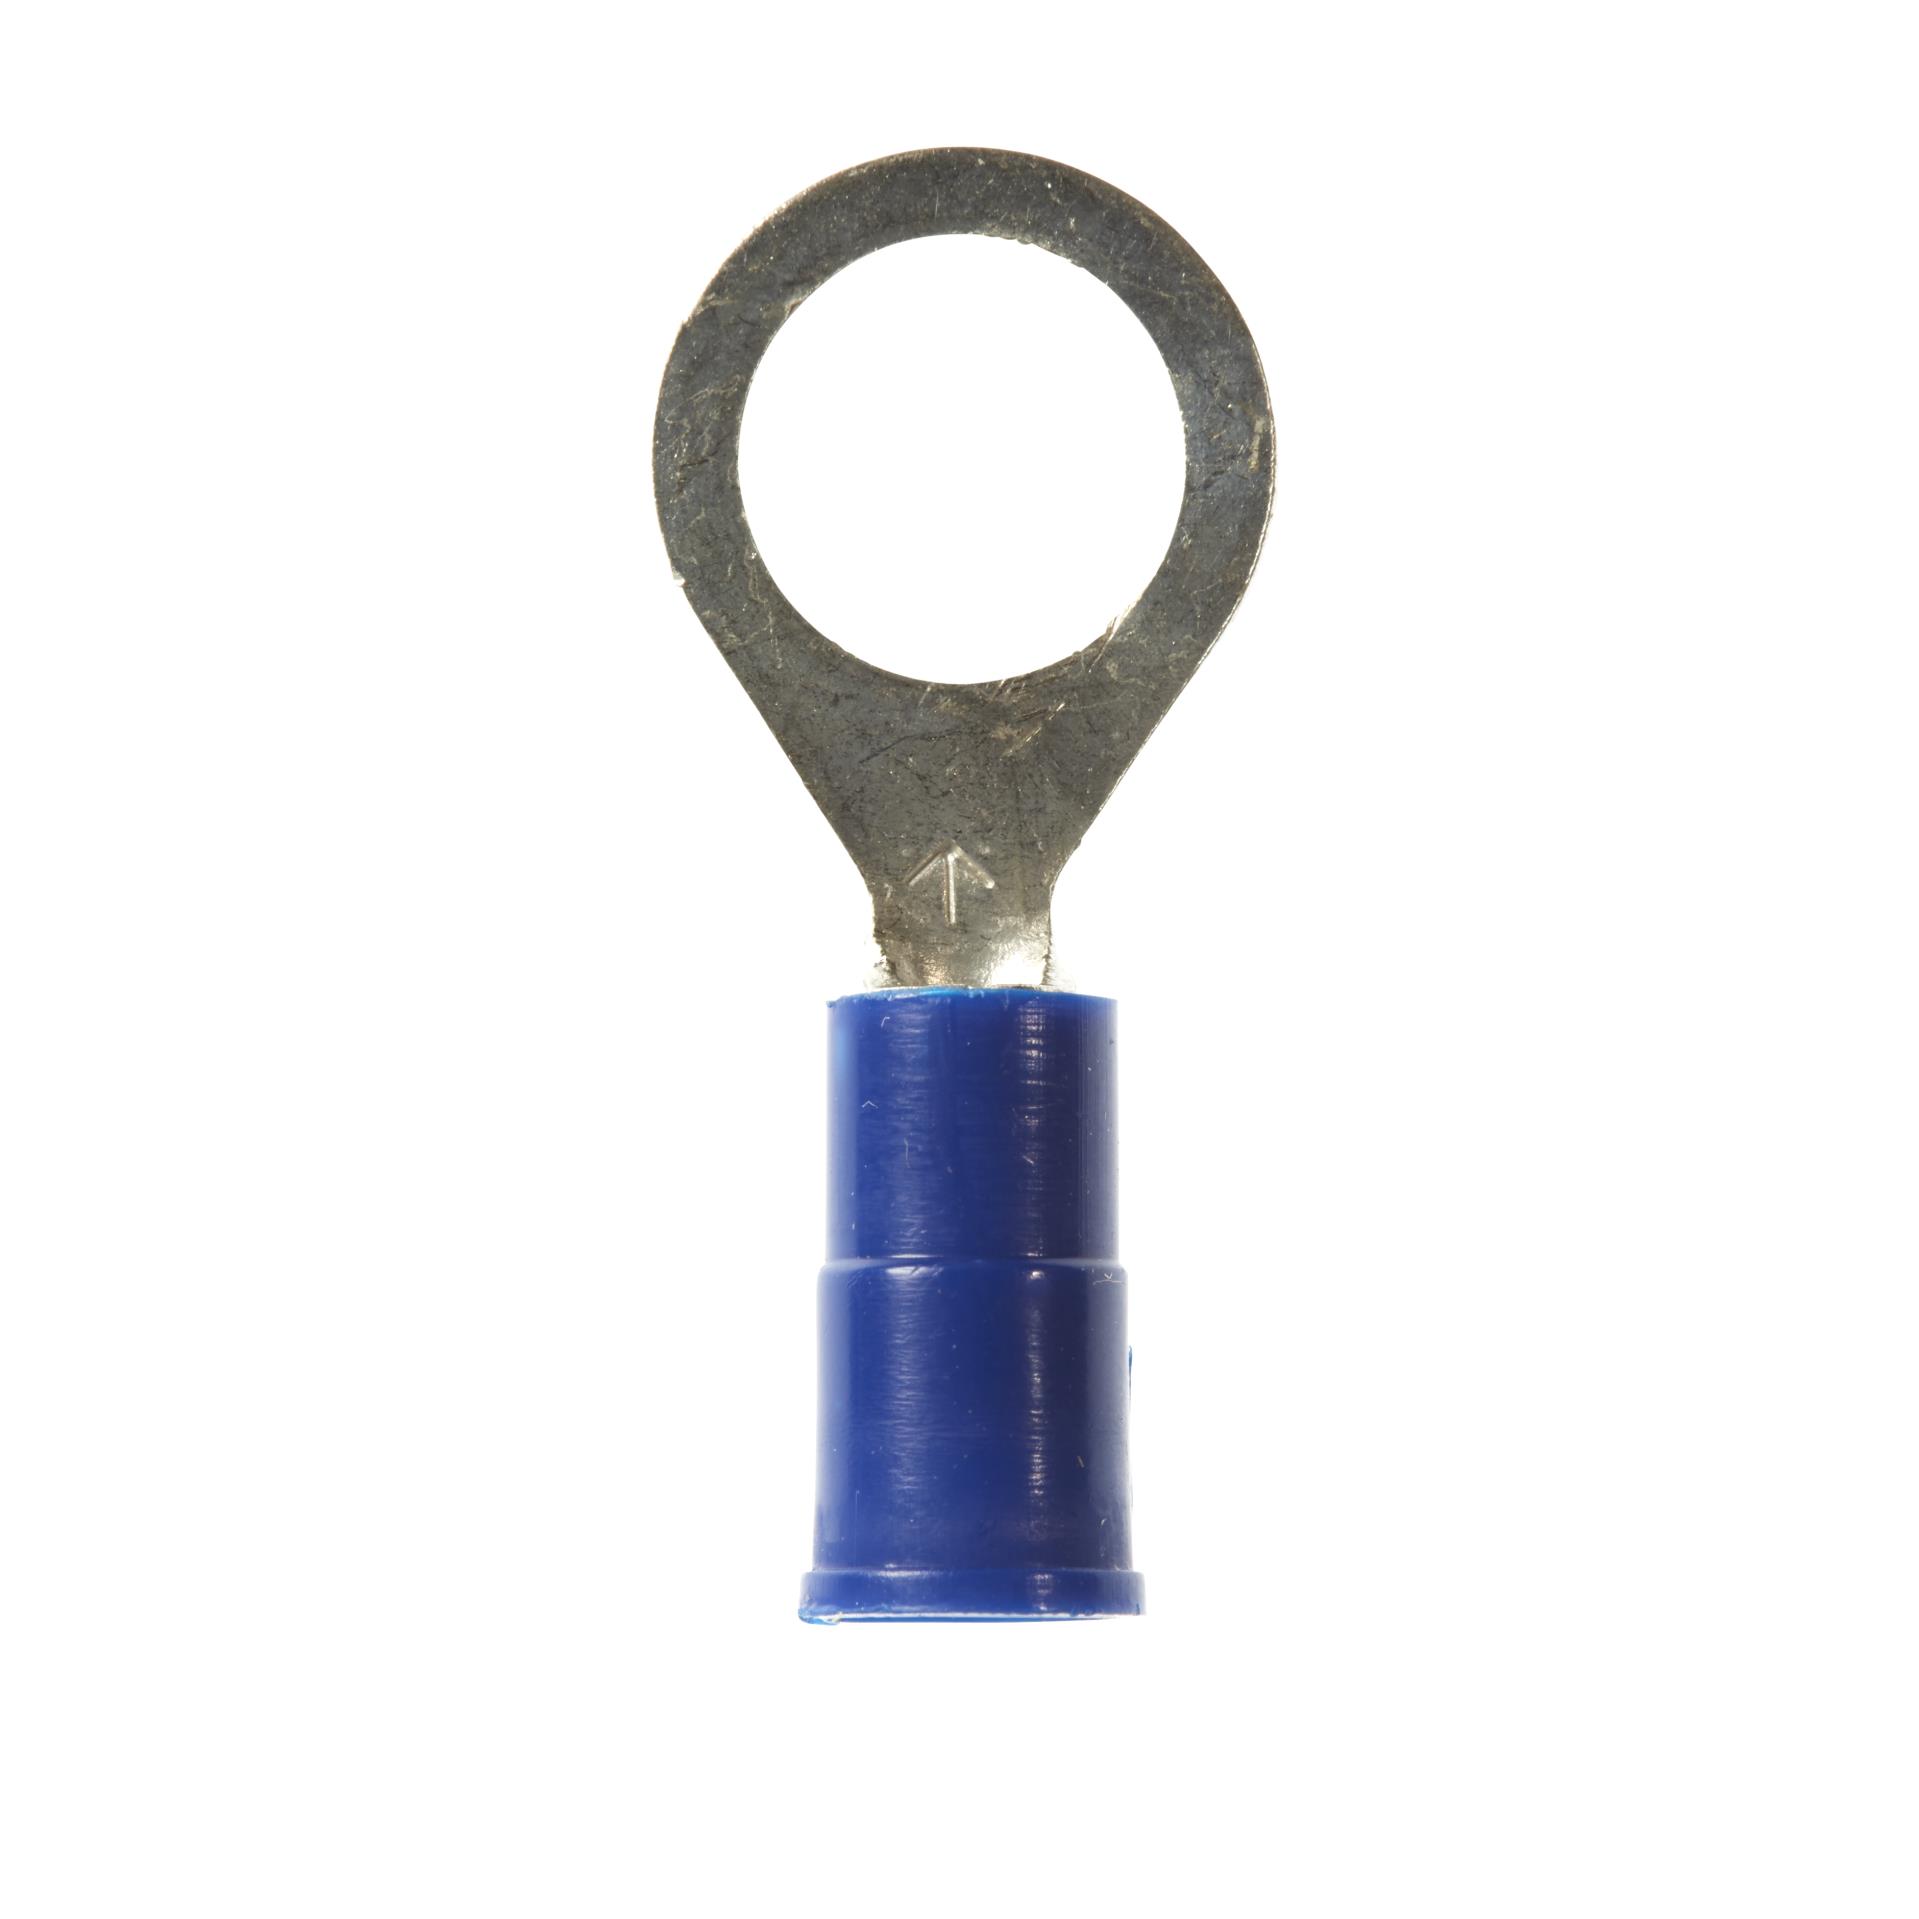 00054007014249 3M™ Scotchlok™ Ring Tongue, Vinyl Insulated Brazed Seam  MV14-516R/SK, Stud Size 5/16, 1000/Case Aircraft products  ring-terminals 9337633